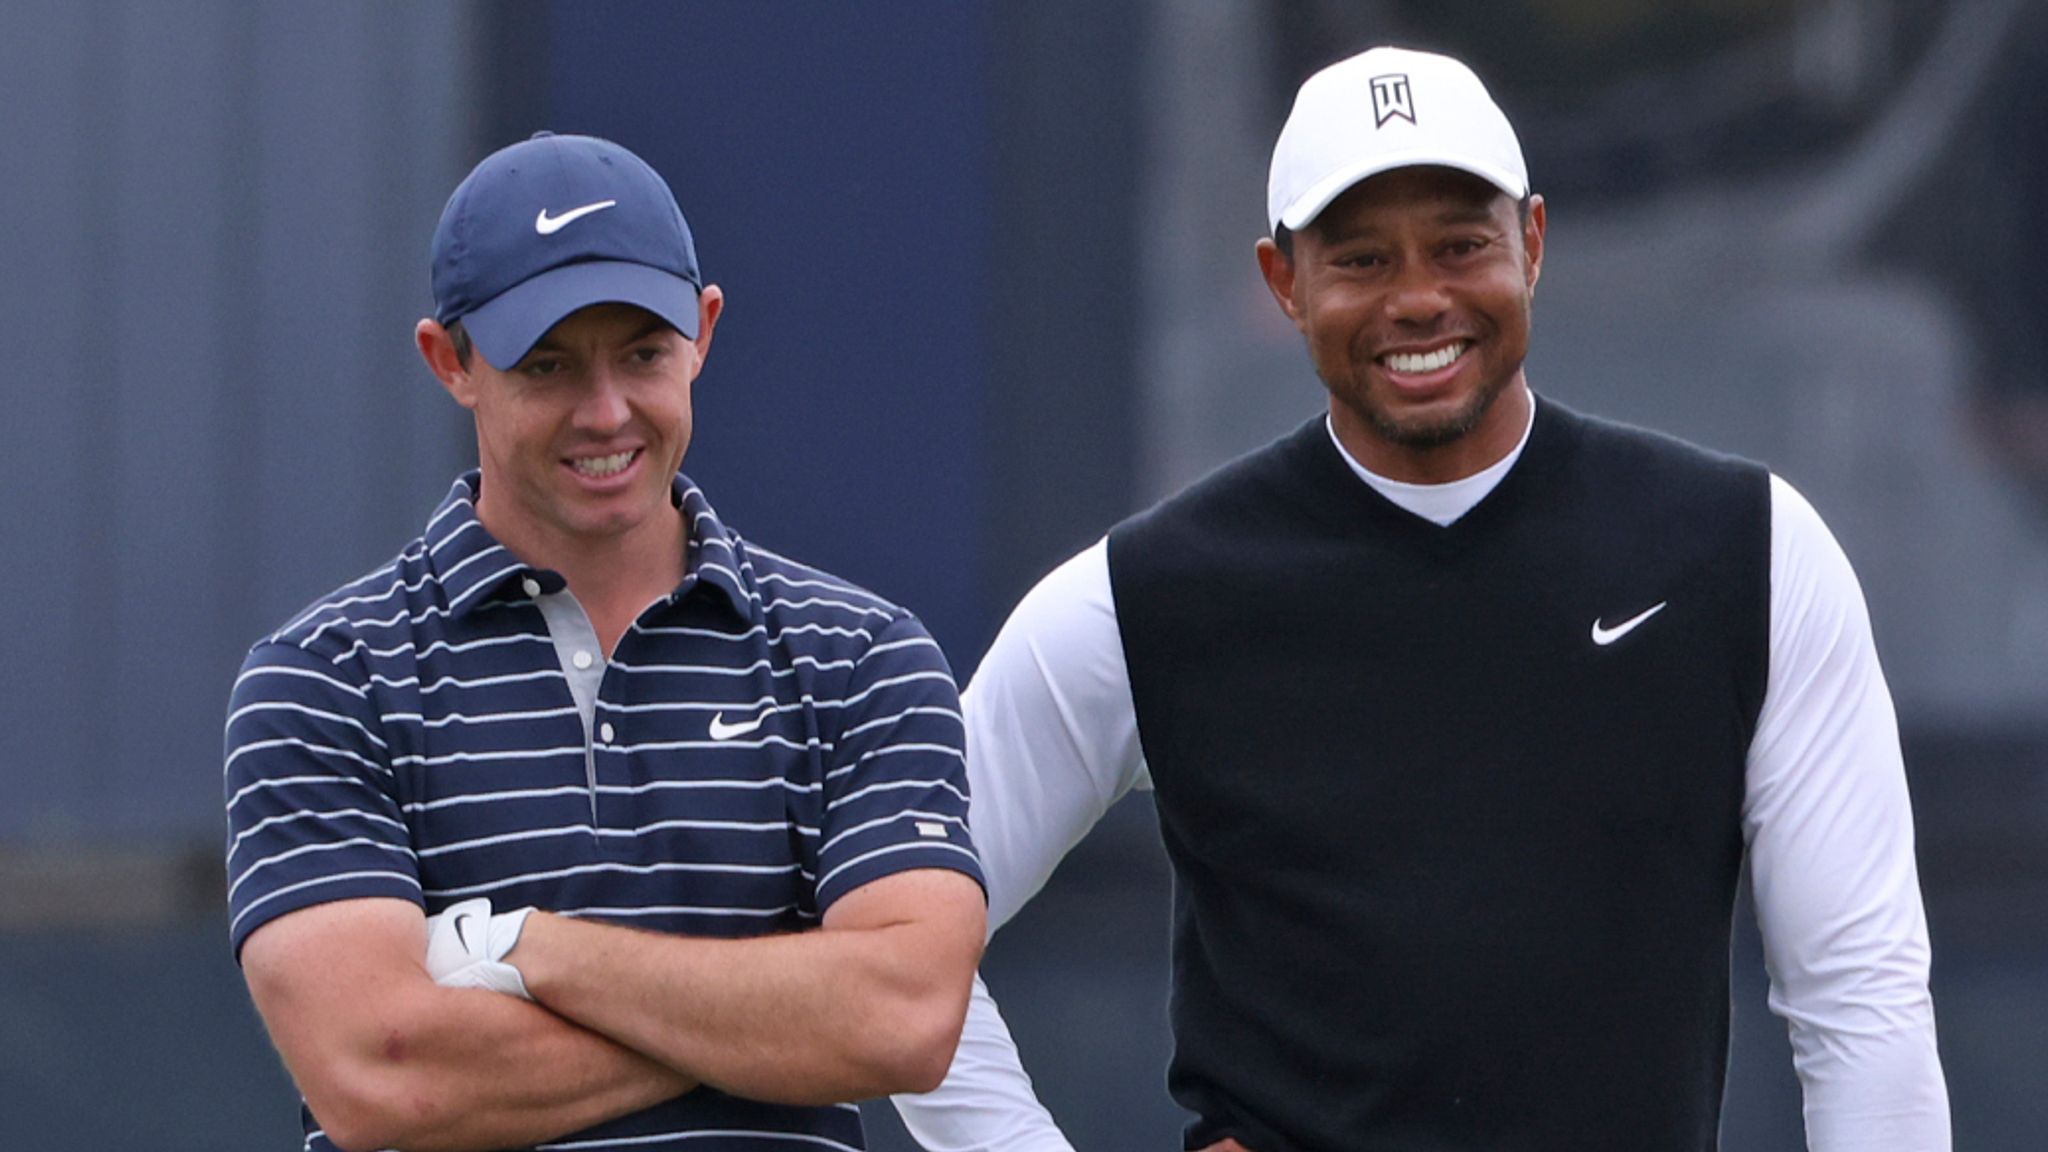 Tiger Woods to play in the PNC Championship with his son, live on Sky Sports in December Golf News Sky Sports